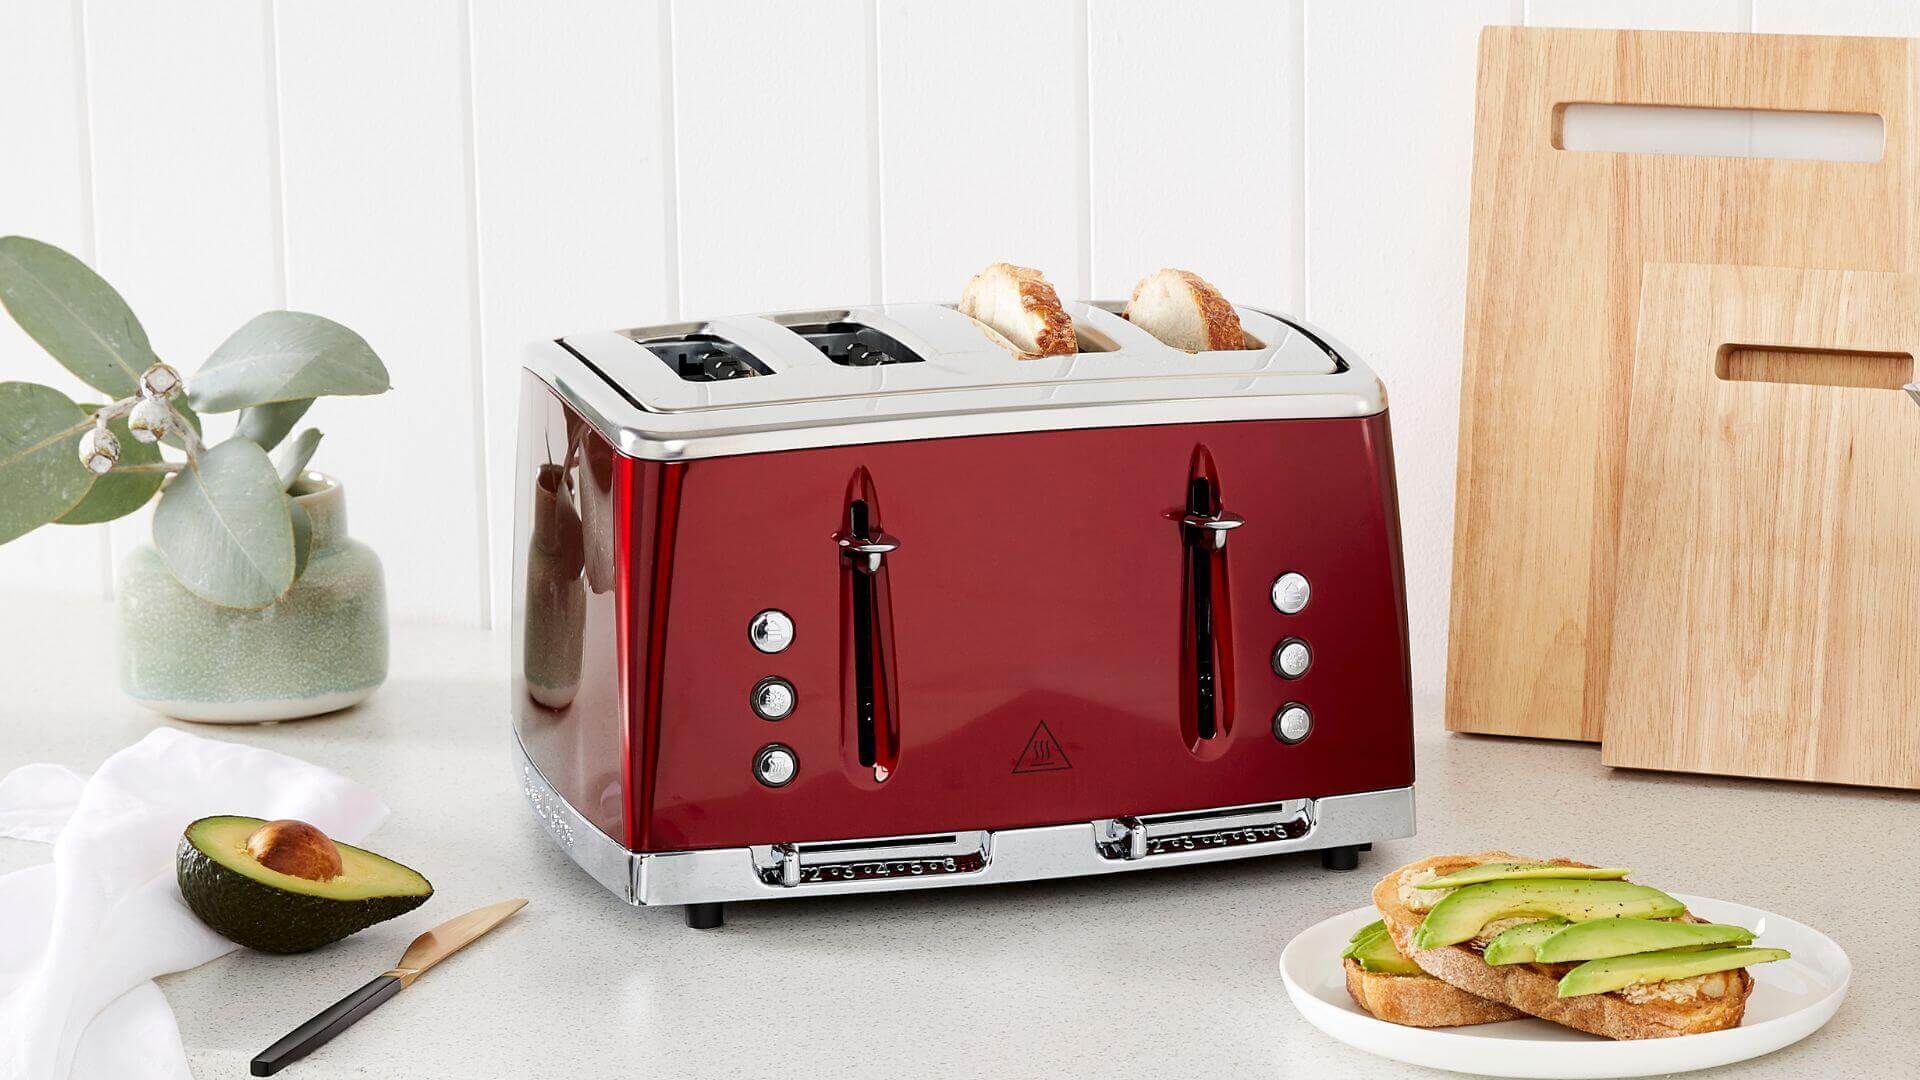 Bready Or Not: The Complete Guide To Buying Sandwich Presses & Toasters